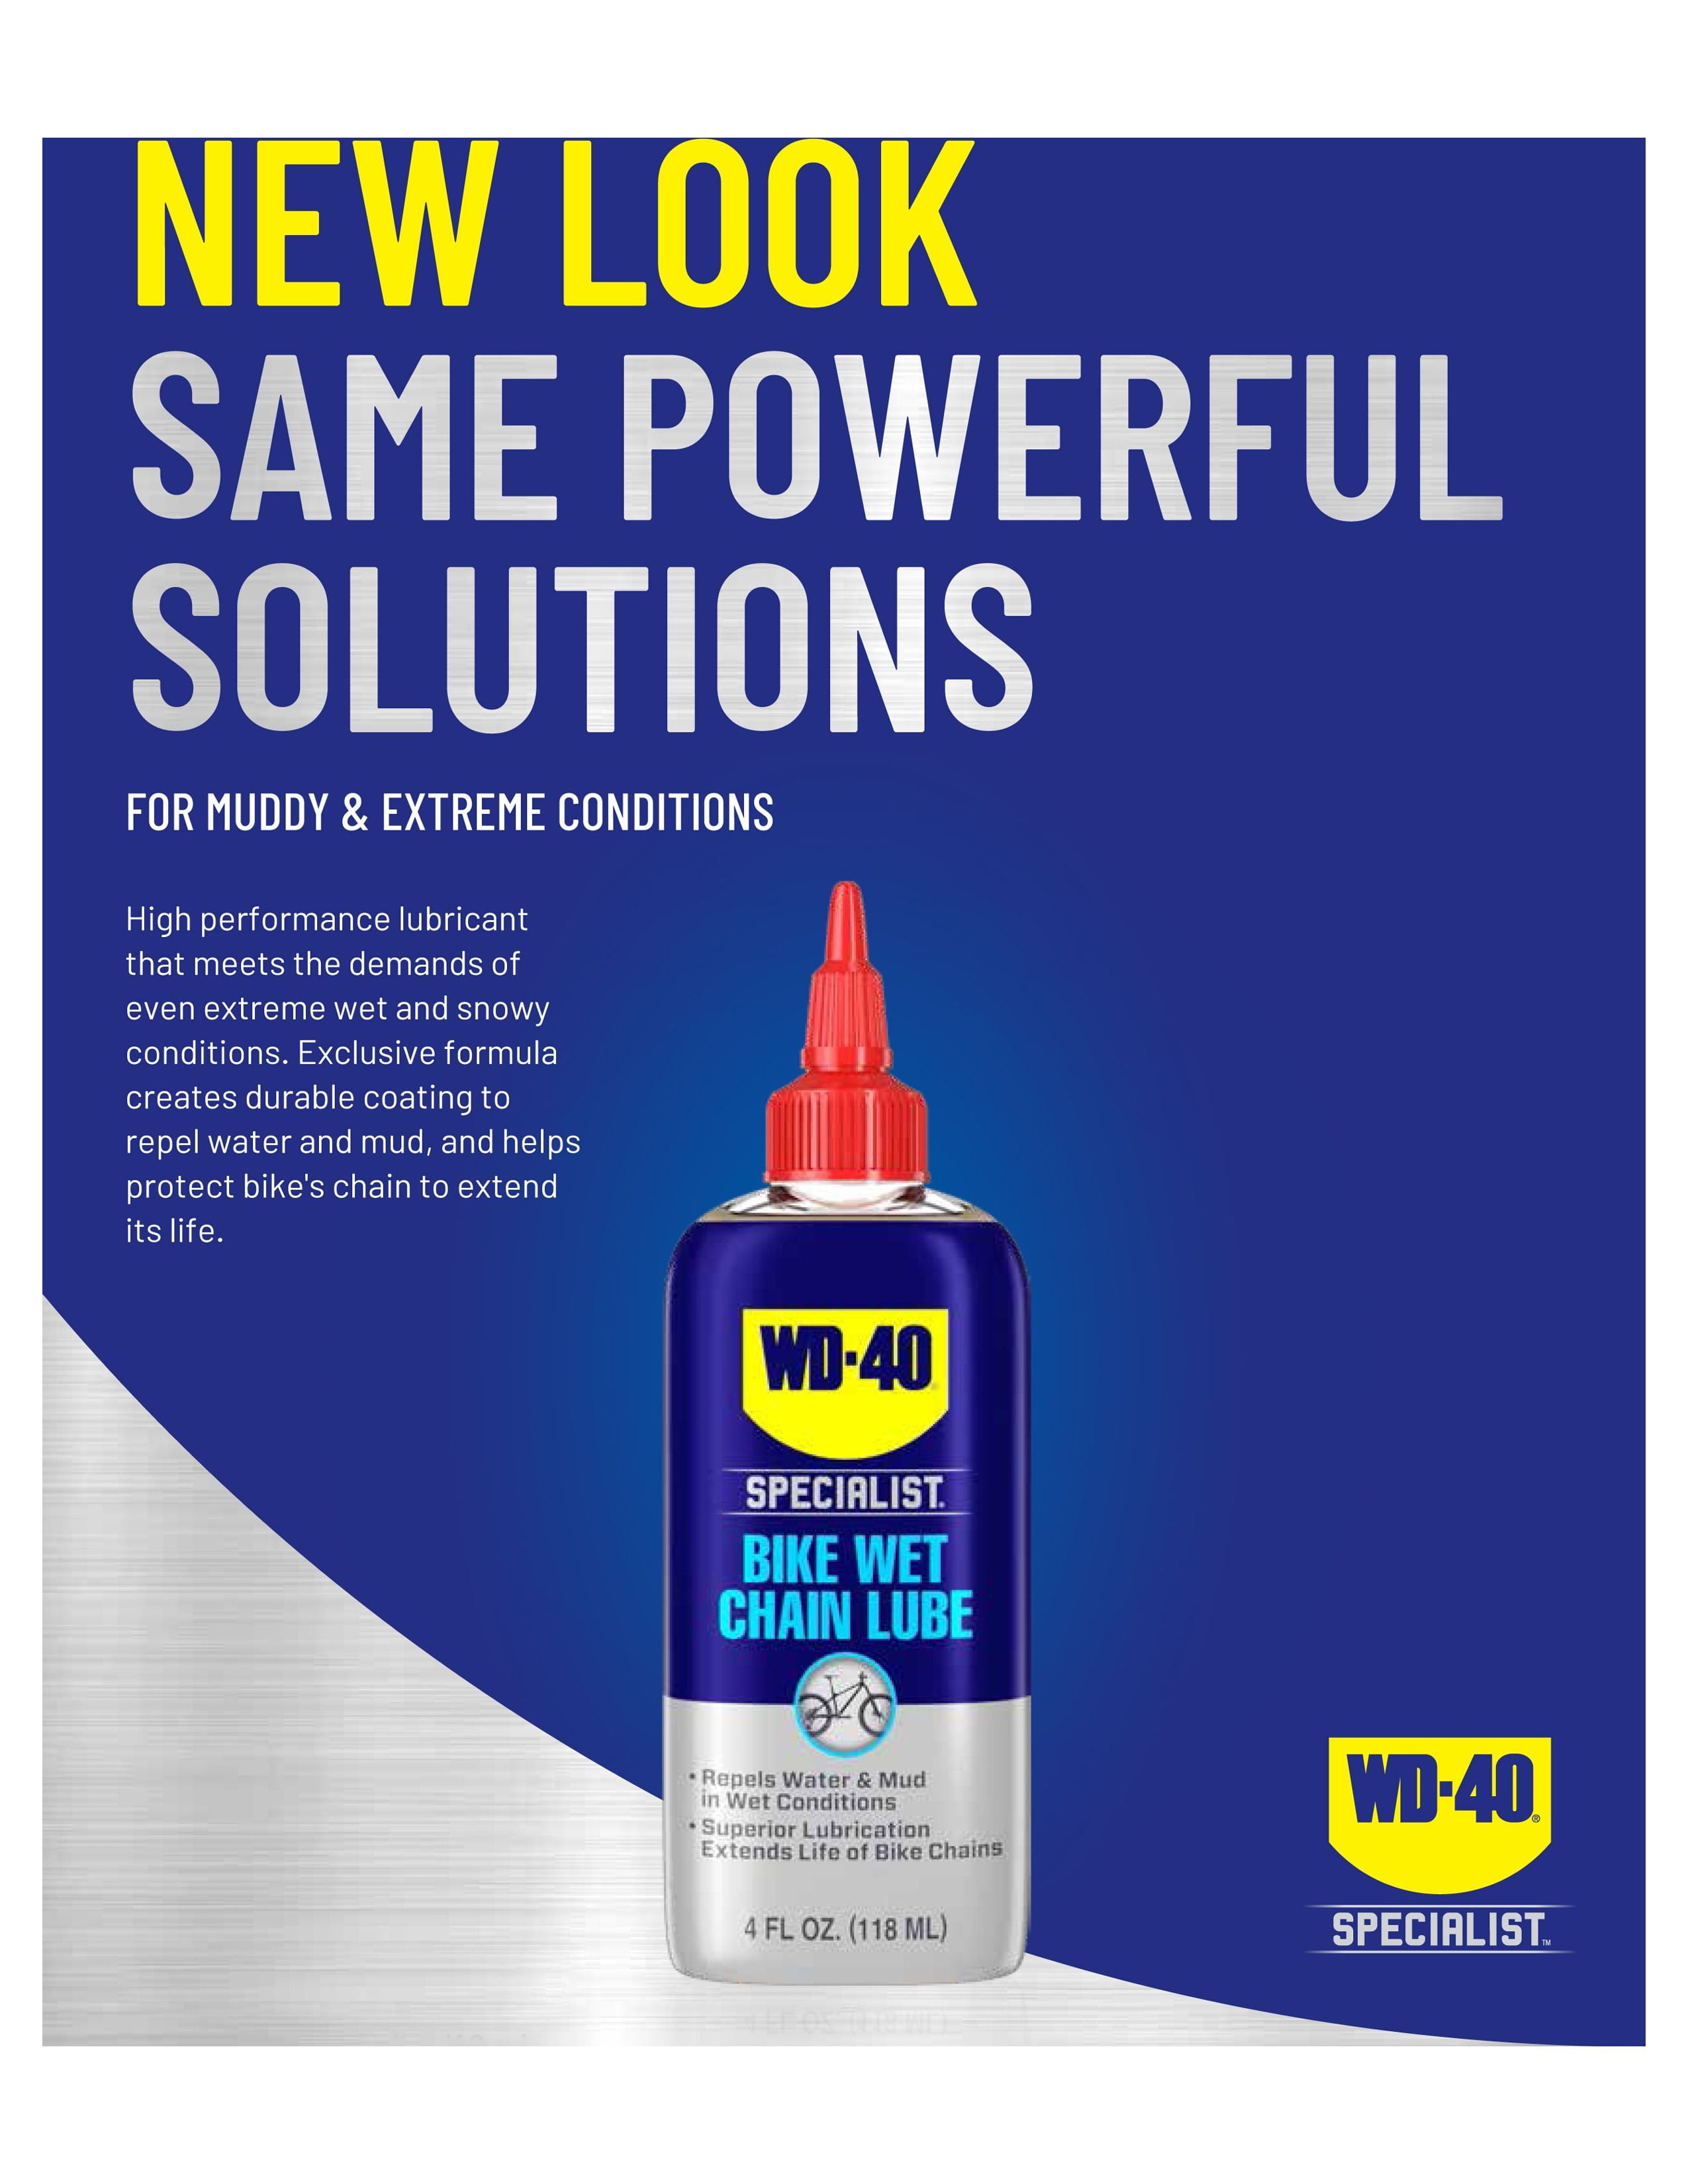 Product review: Specialist WD-40 Chain Wax